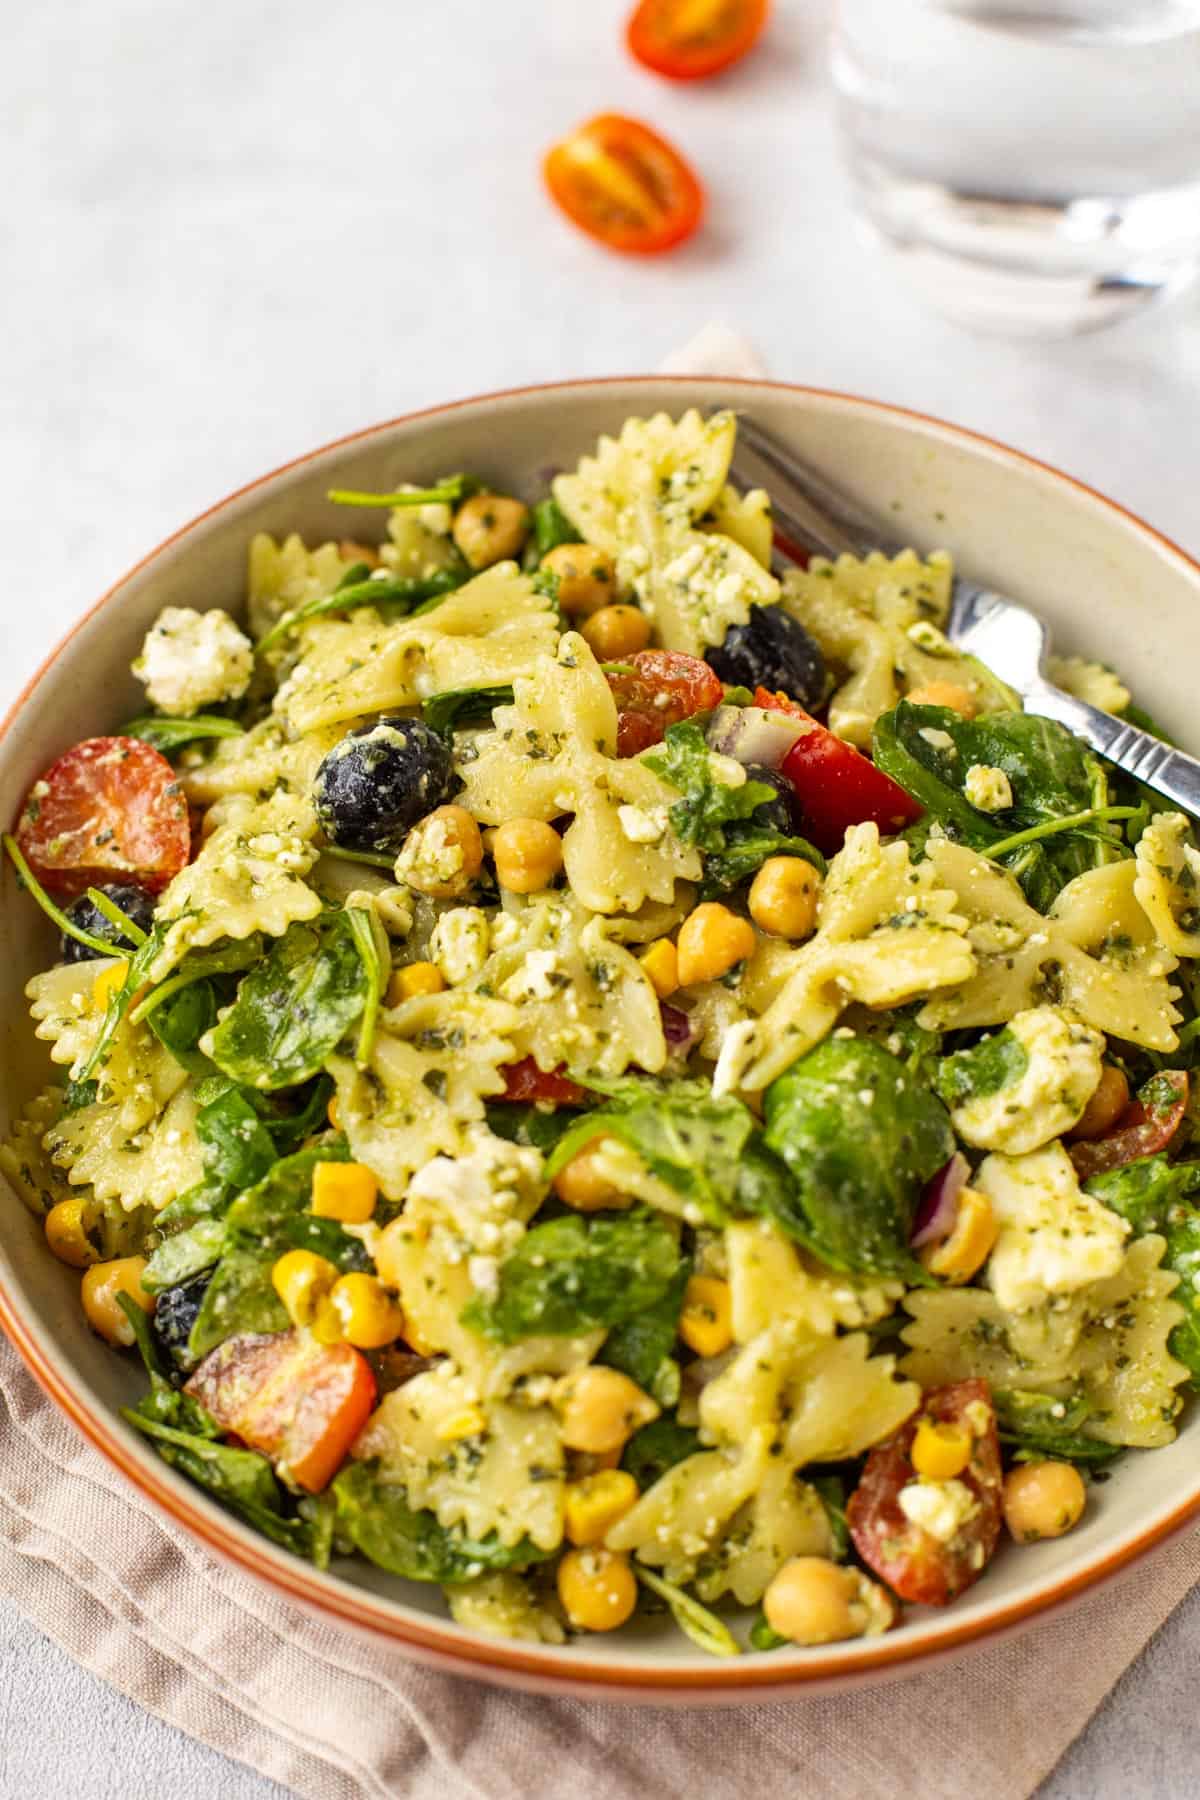 A bowlful of vegetarian chickpea pasta salad with feta cheese and tomatoes.